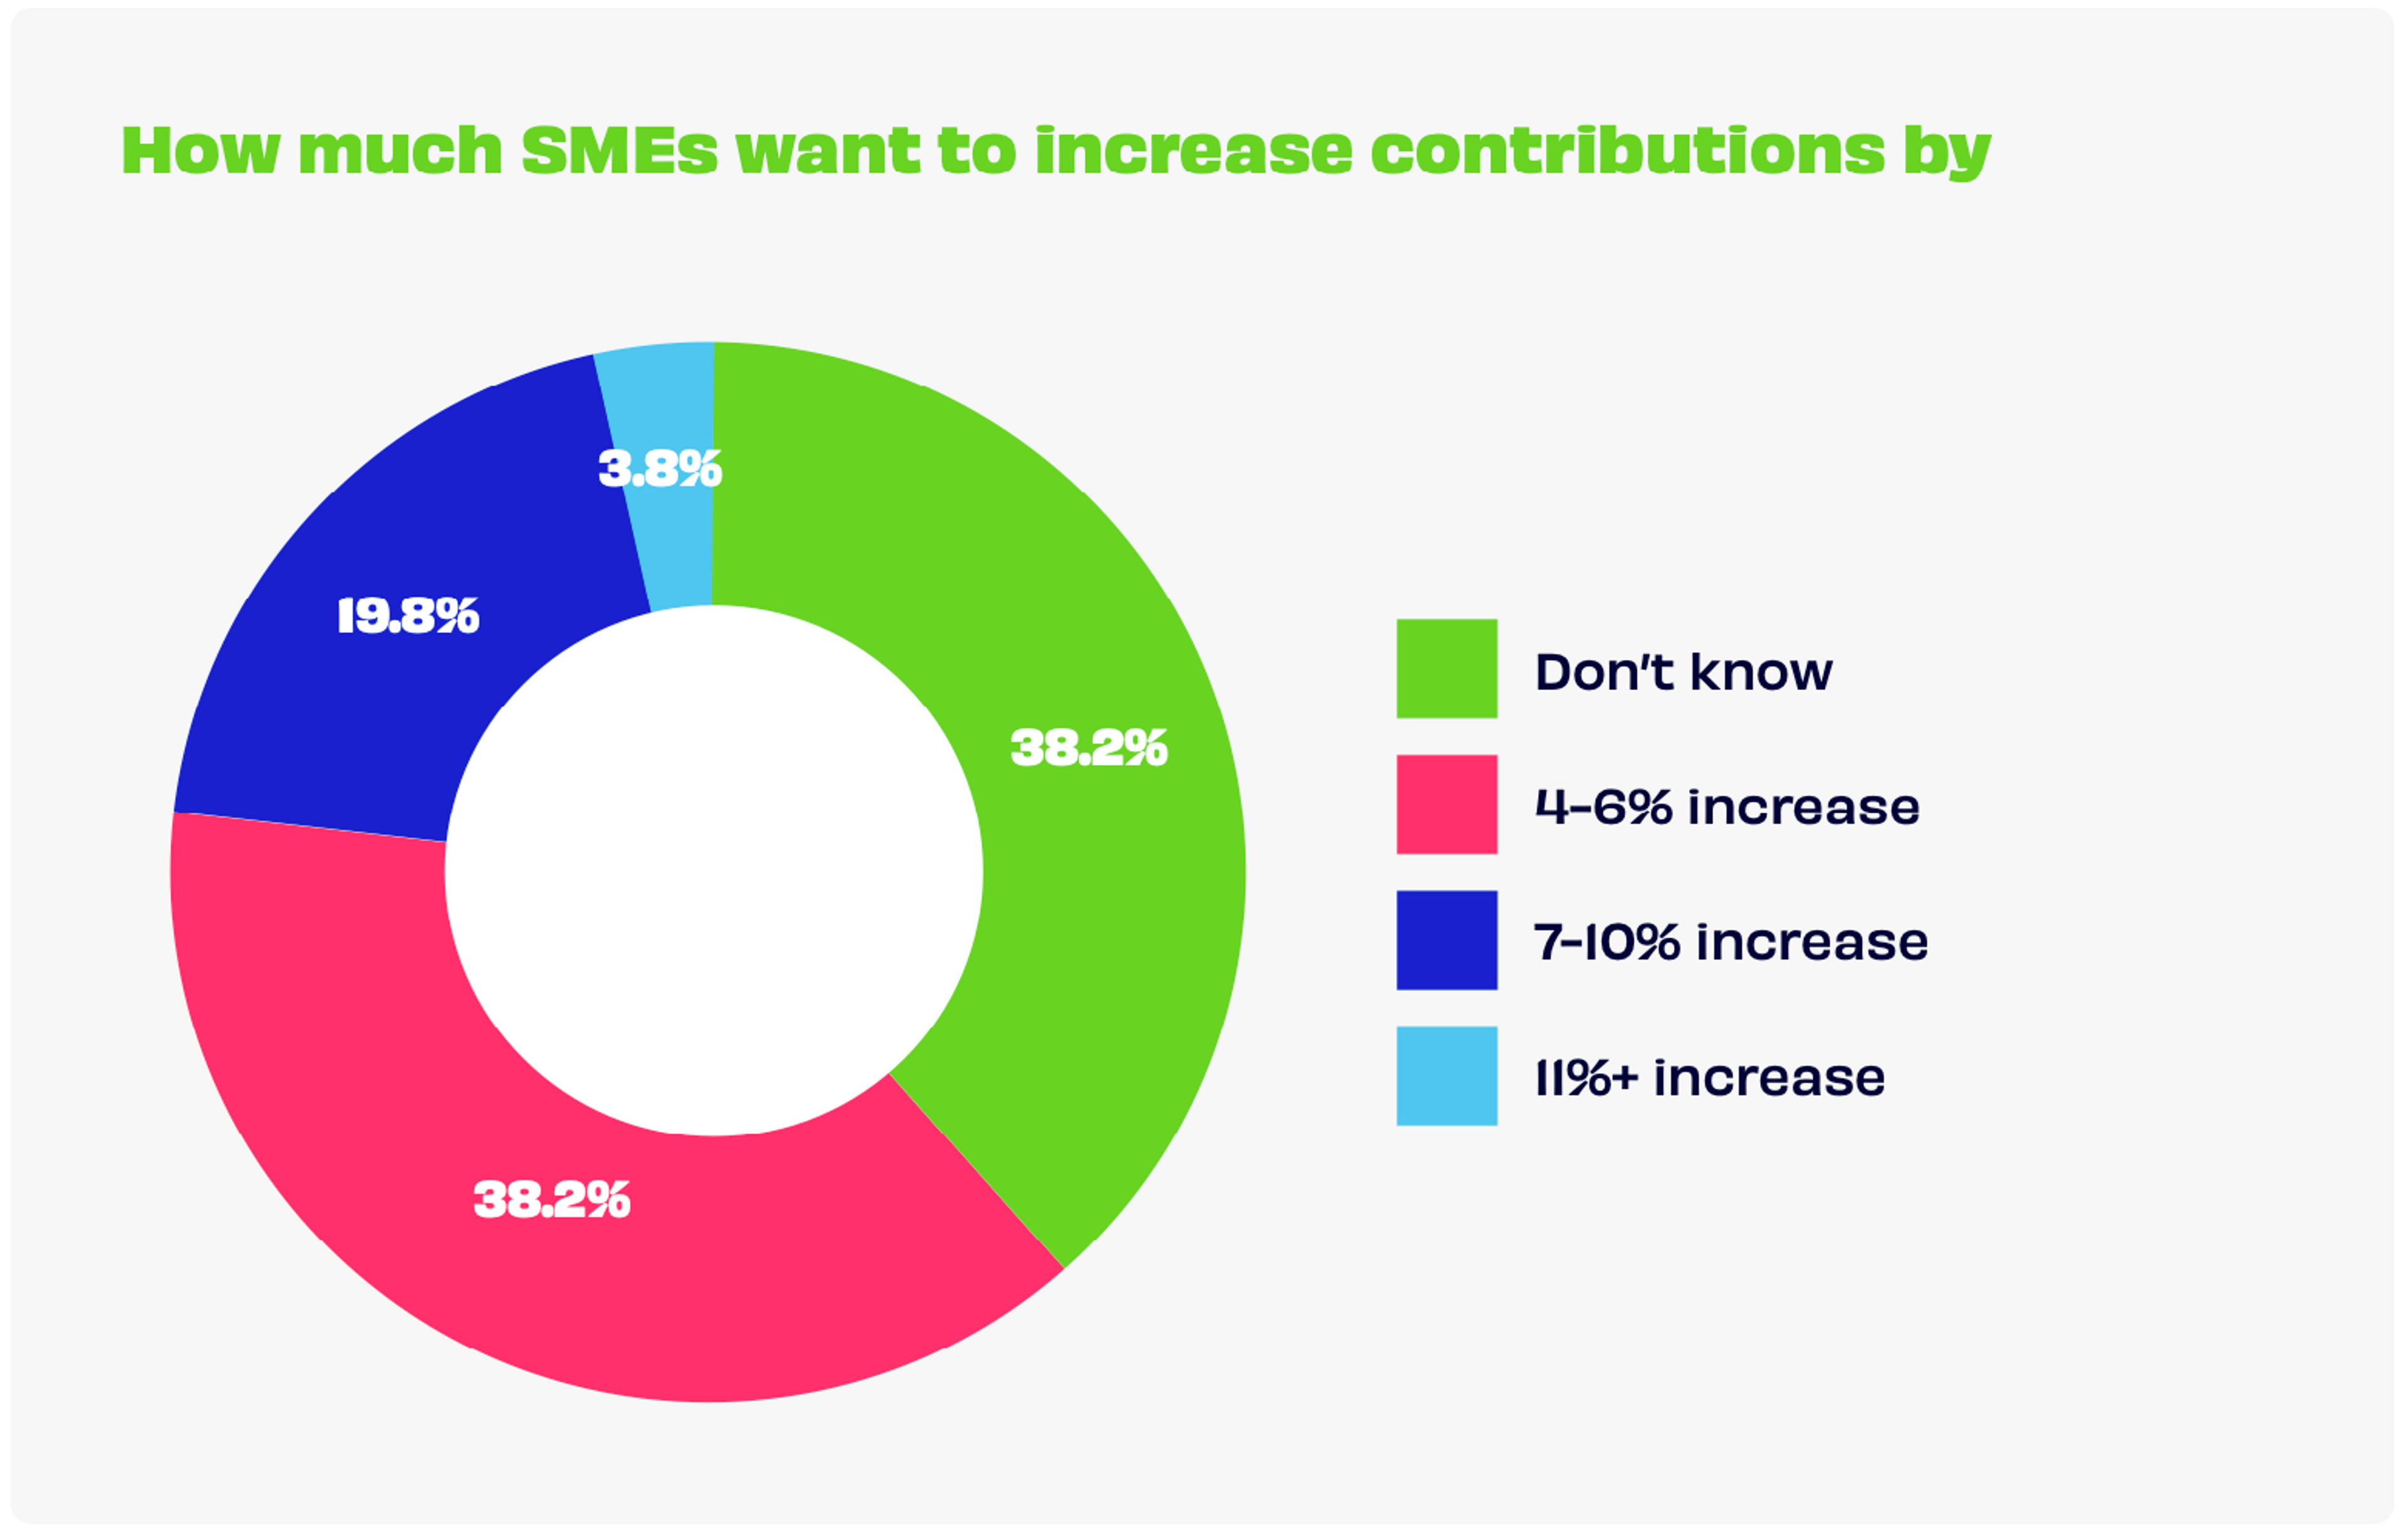 A pie chart showing how much businesses are planning to increase their contributions by